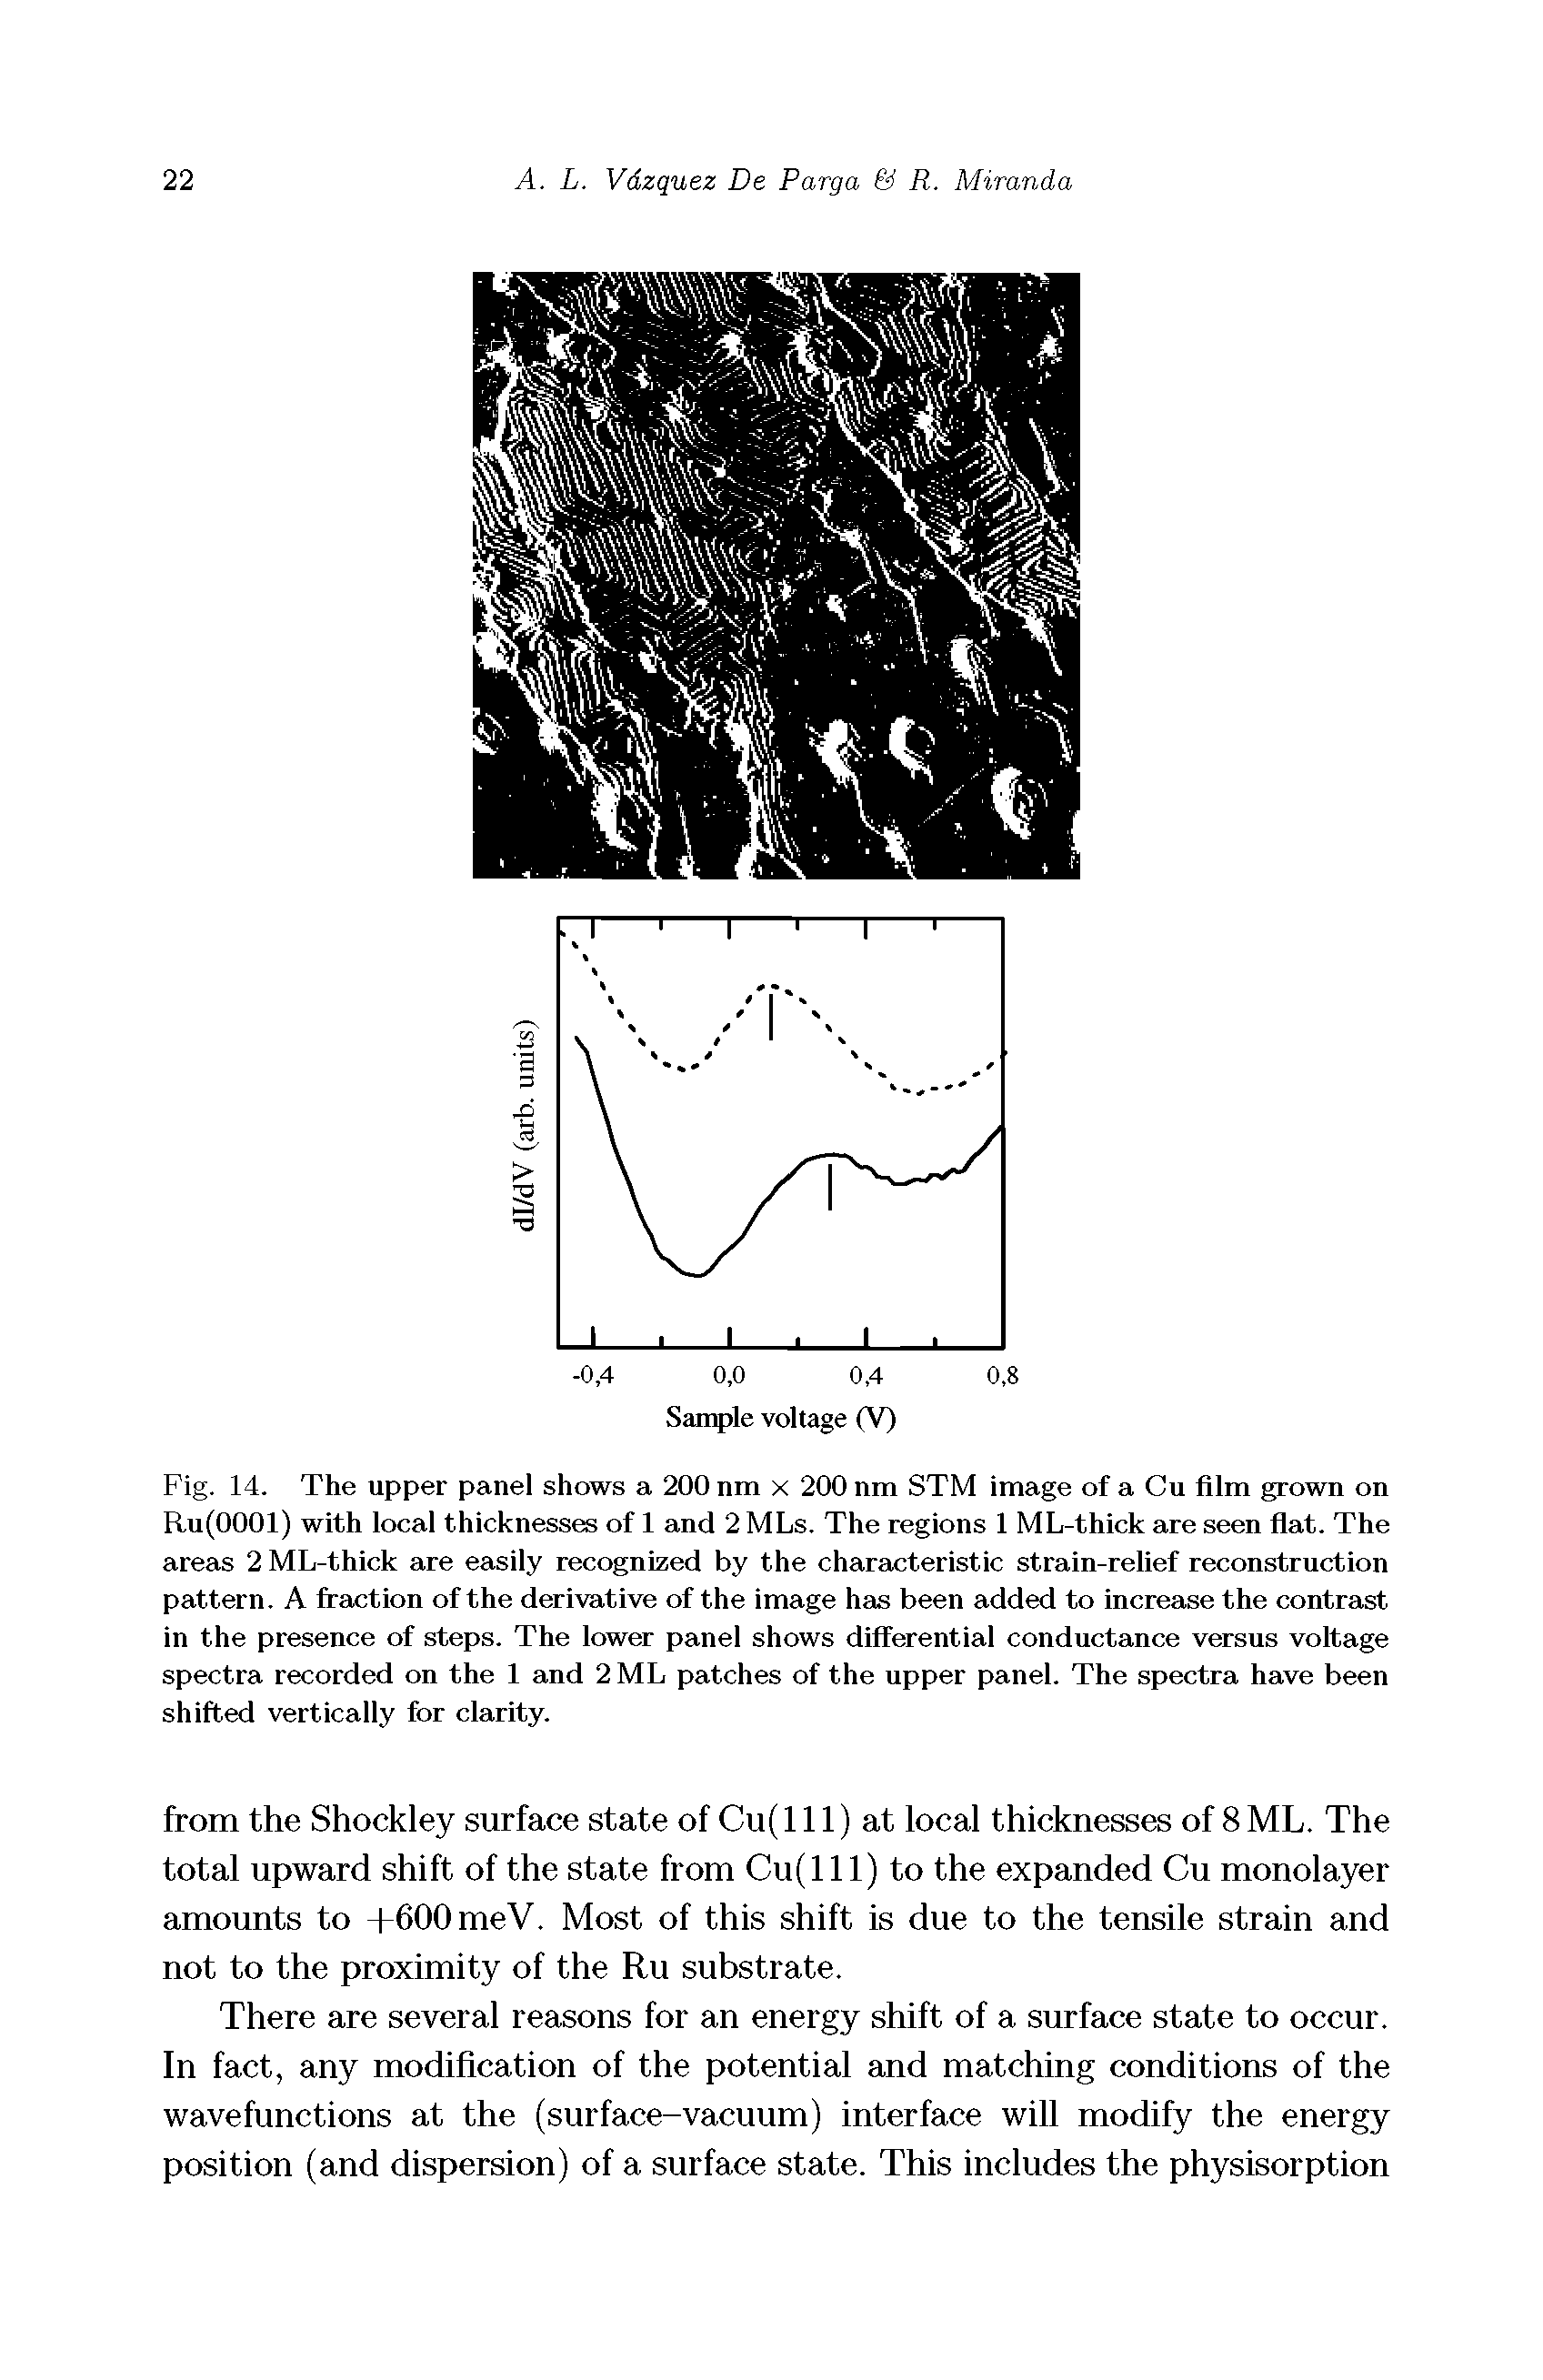 Fig. 14. The upper panel shows a 200 nm x 200 nm STM image of a Cu film grown on Ru(0001) with local thicknesses of 1 and 2 MLs. The regions 1 ML-thick are seen flat. The areas 2 ML-thick are easily recognized by the characteristic strain-relief reconstruction pattern. A fraction of the derivative of the image has been added to increase the contrast in the presence of steps. The lower panel shows differential conductance versus voltage spectra recorded on the 1 and 2 ML patches of the upper panel. The spectra have been shifted vertically for clarity.